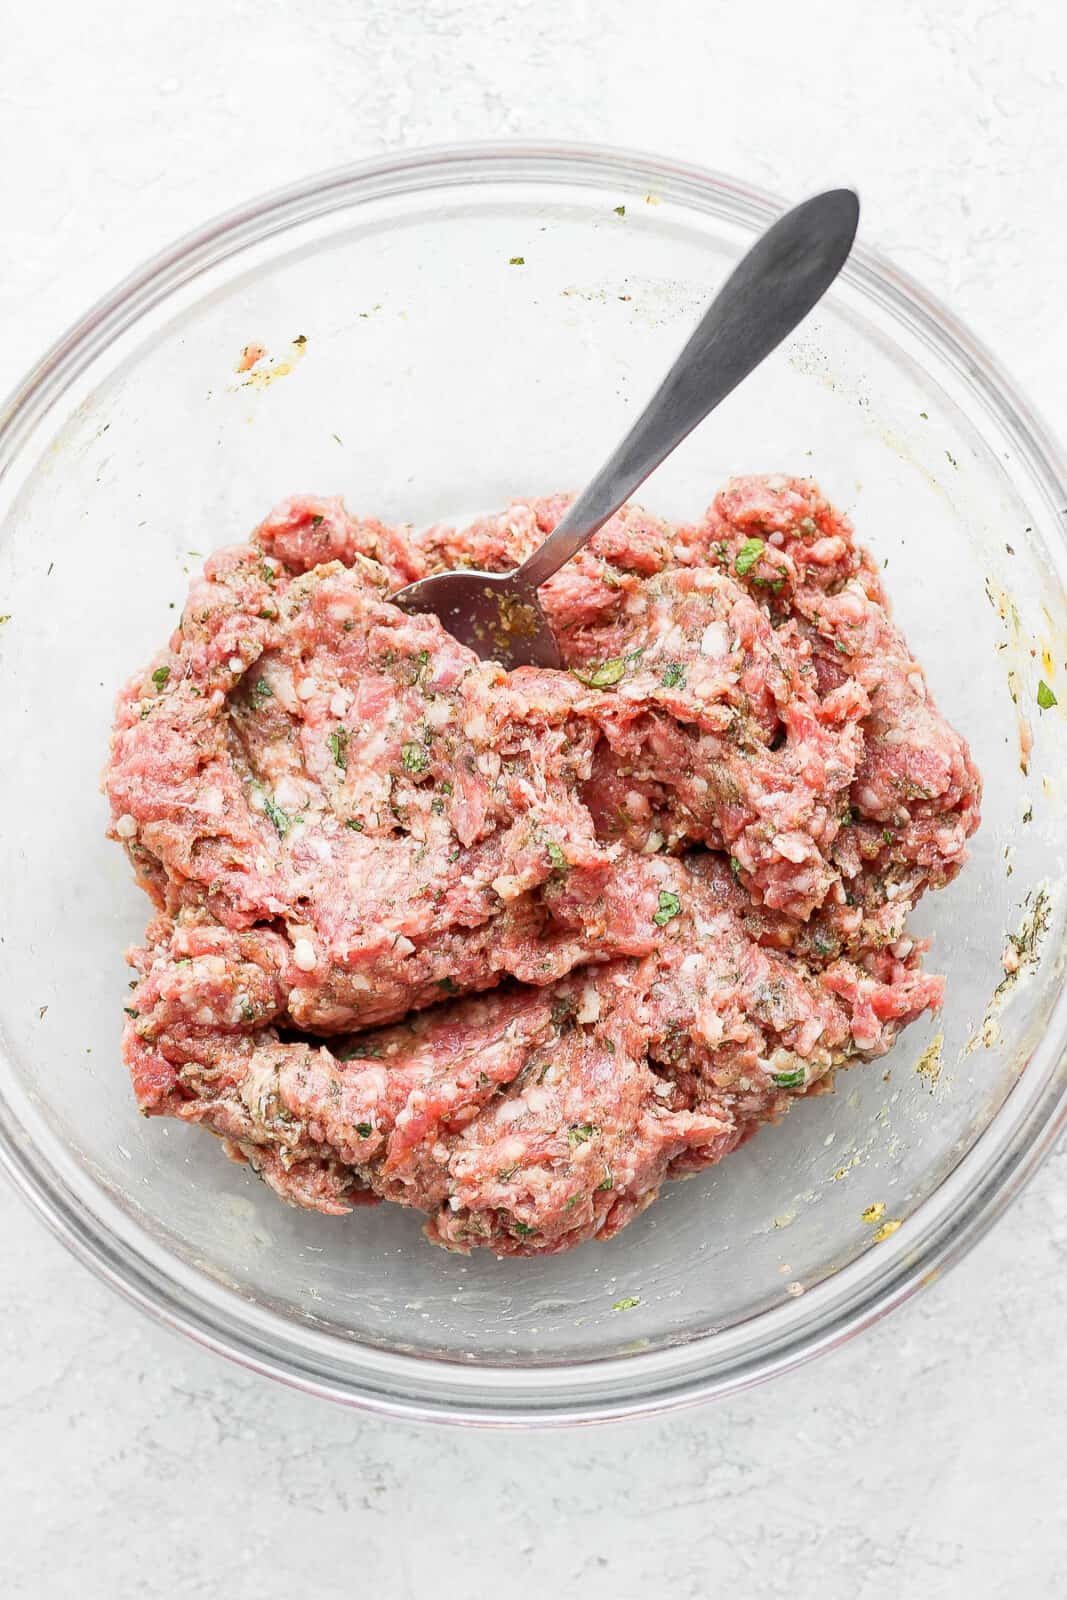 The lamb burger ingredients mixed together in a bowl with a spoon.